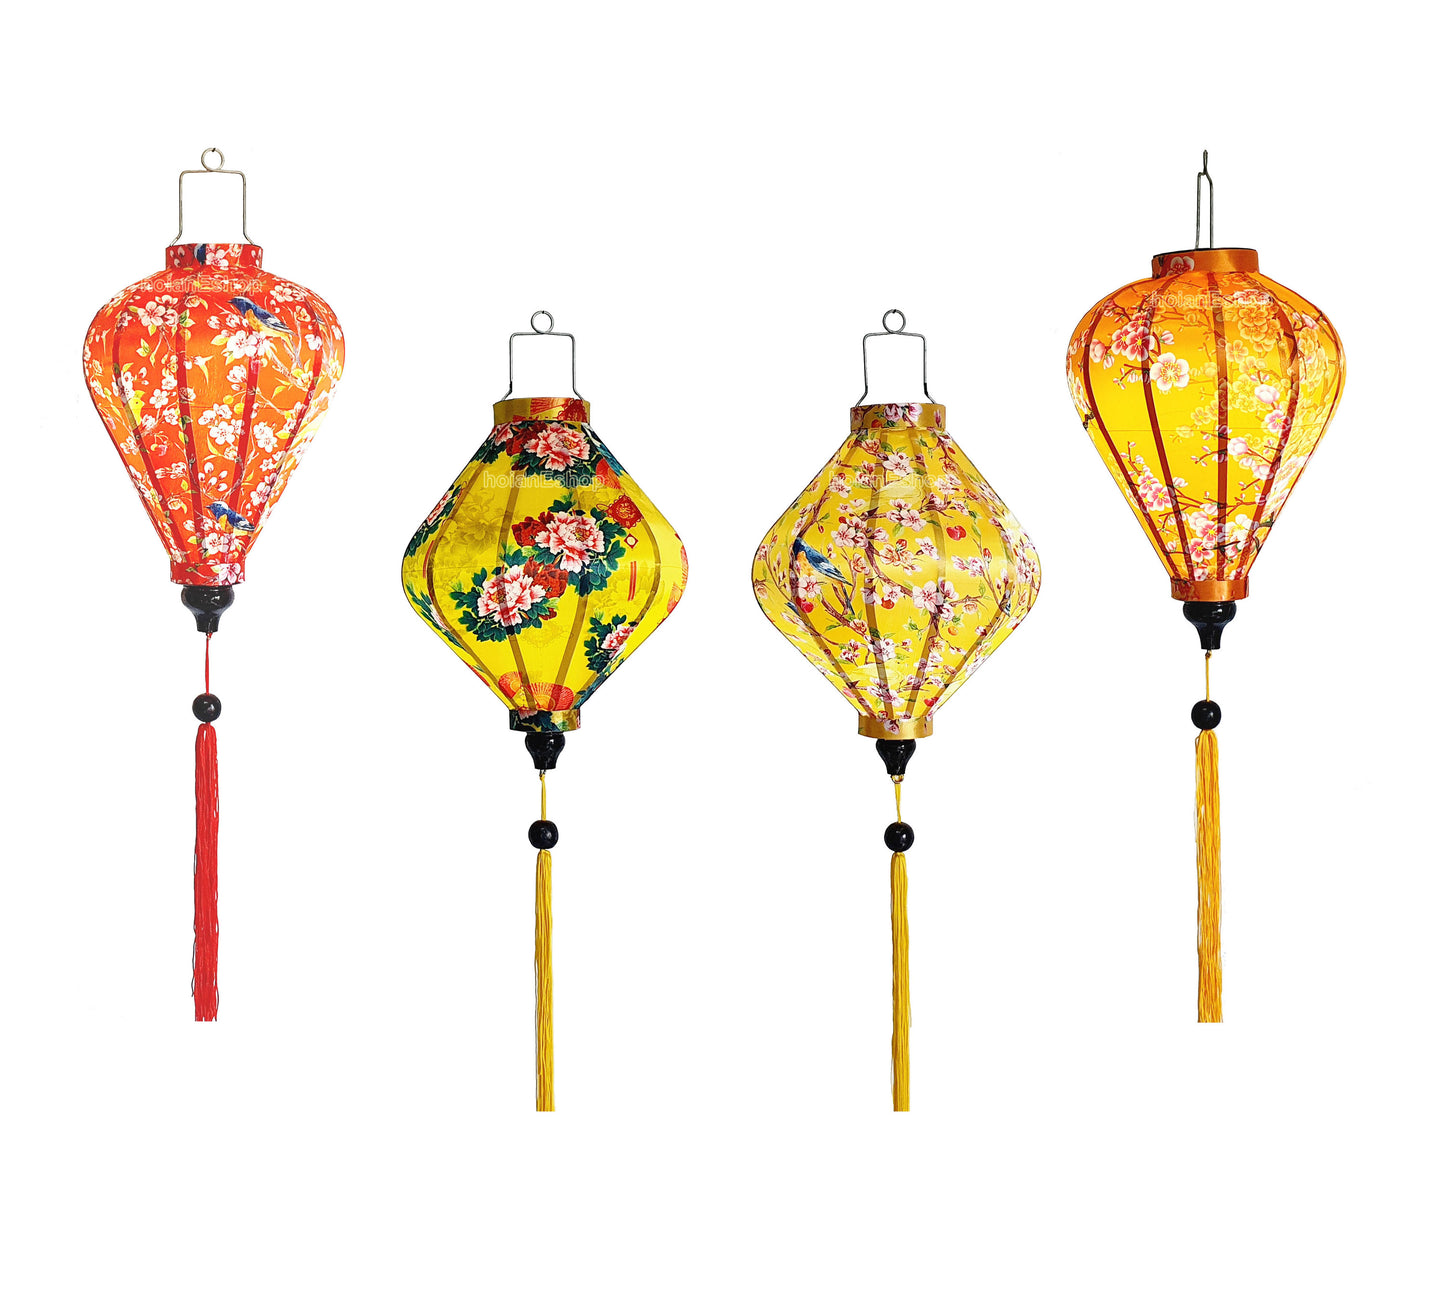 Set 4 Vietnam Silk Lanterns with Apricot flowers fabric for New Year Decorations - TET Decorations - Cherry blossom fabric for Wedding decor